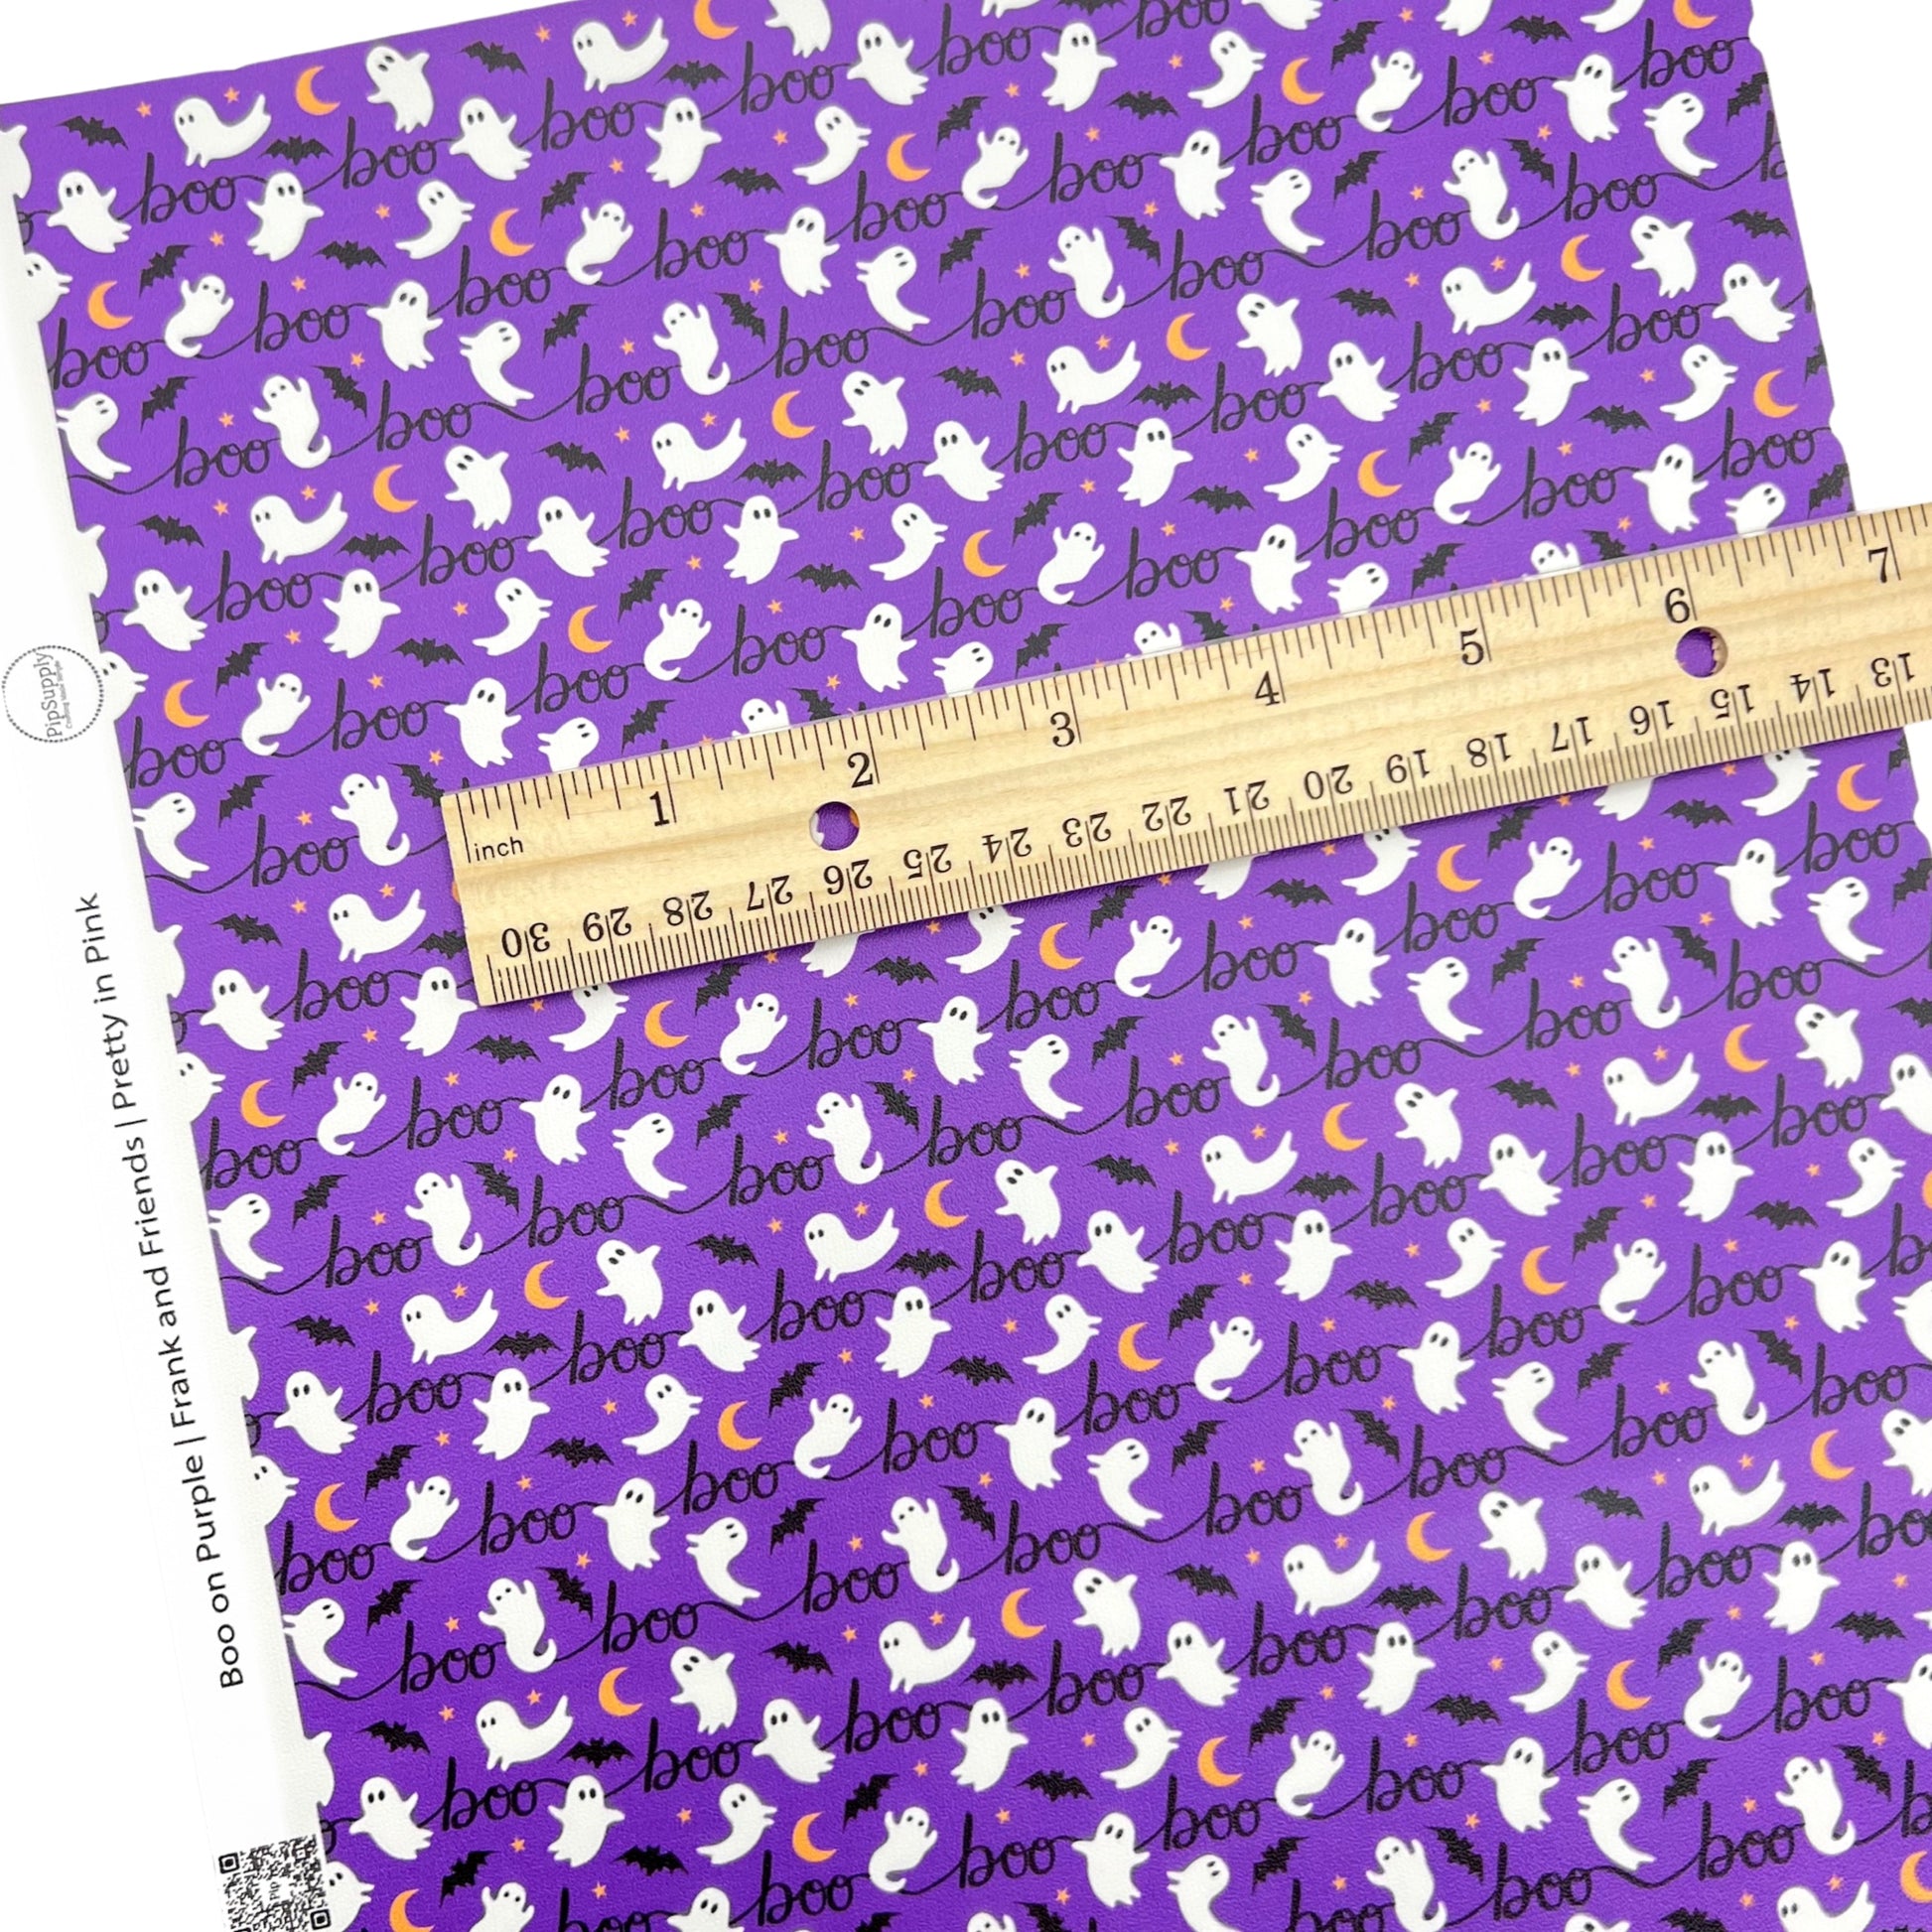 Rolled and individual purple faux leather sheet wth ghosts bats and moons halloween